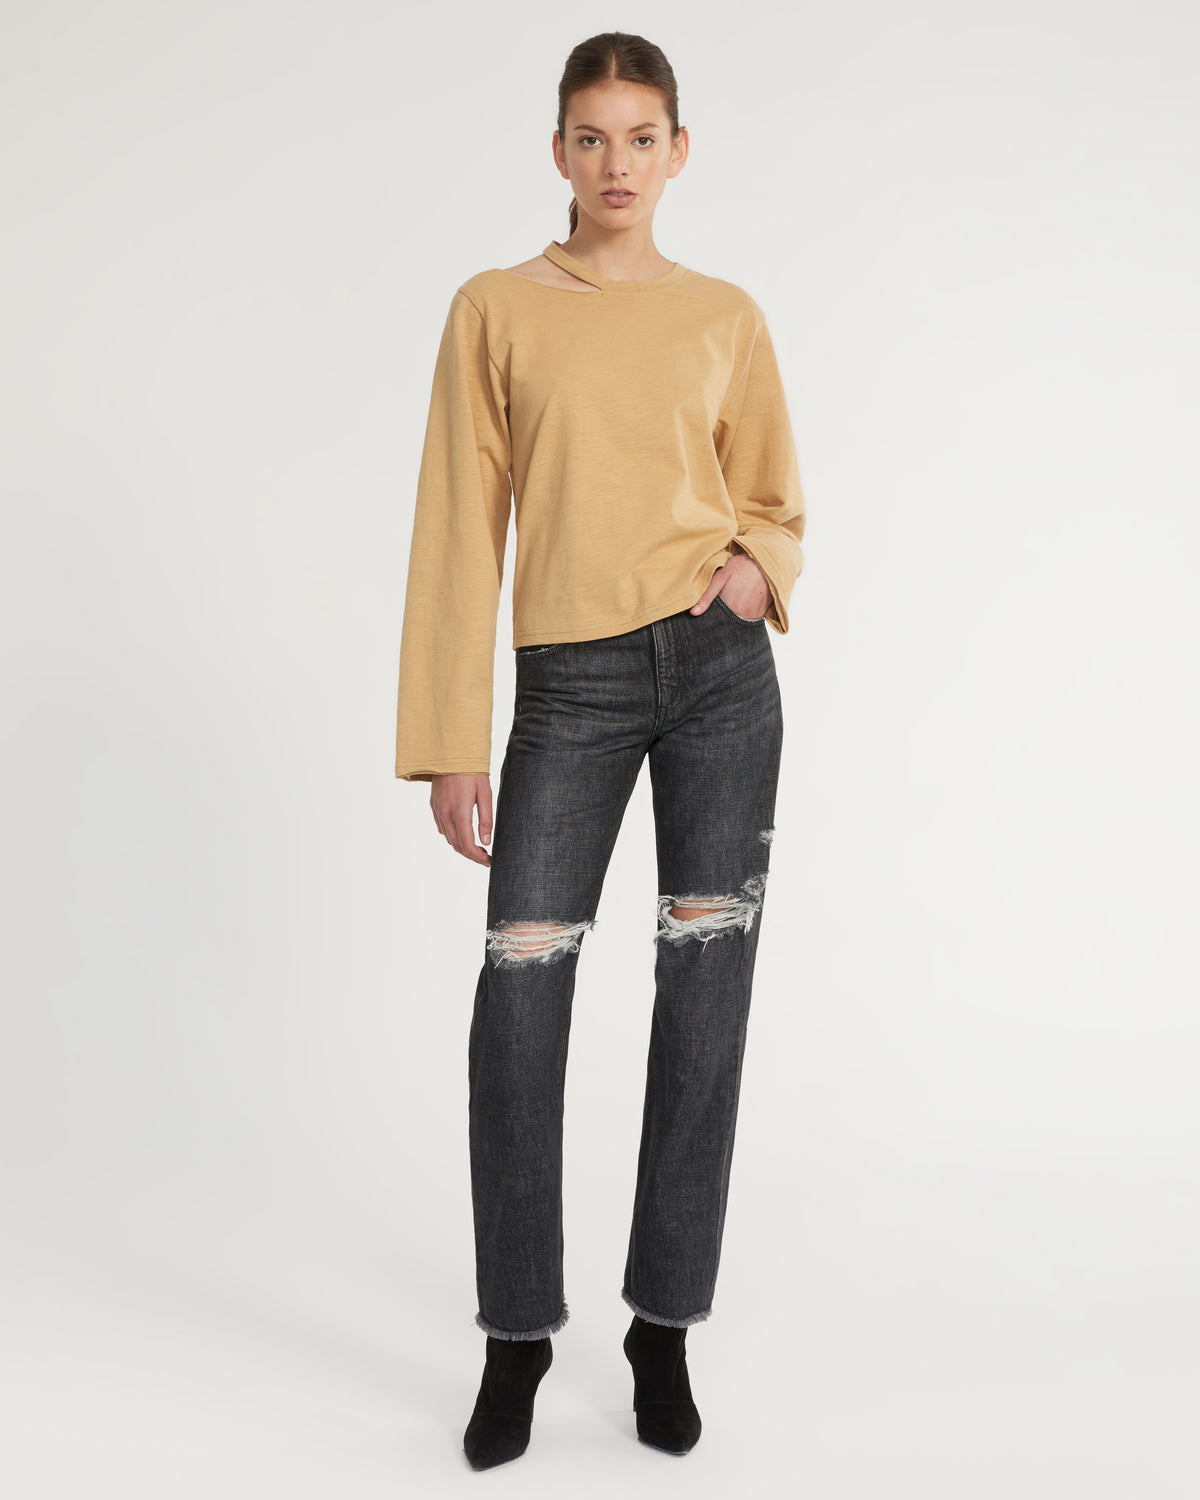 Tate Cut Out Long Sleeve in Sedona